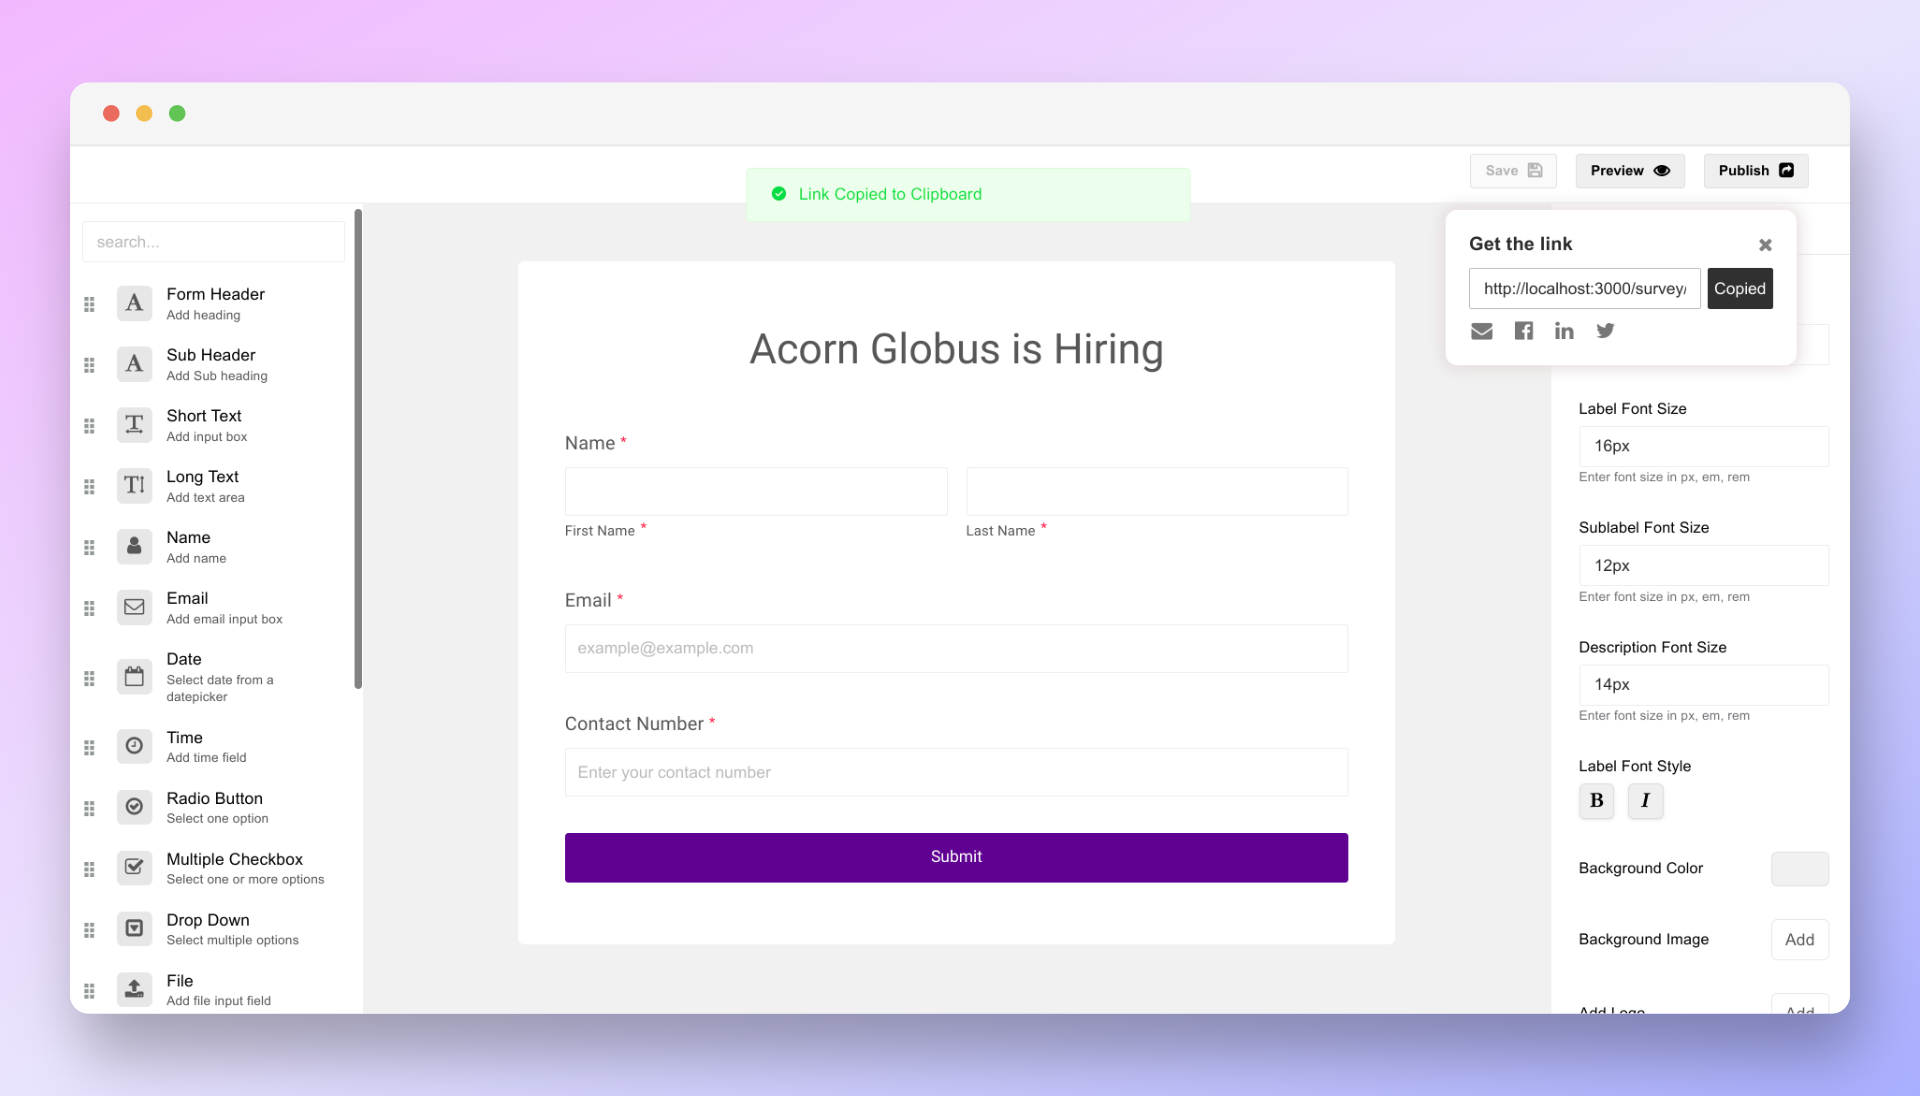 Form builder being used for creating and publishing form